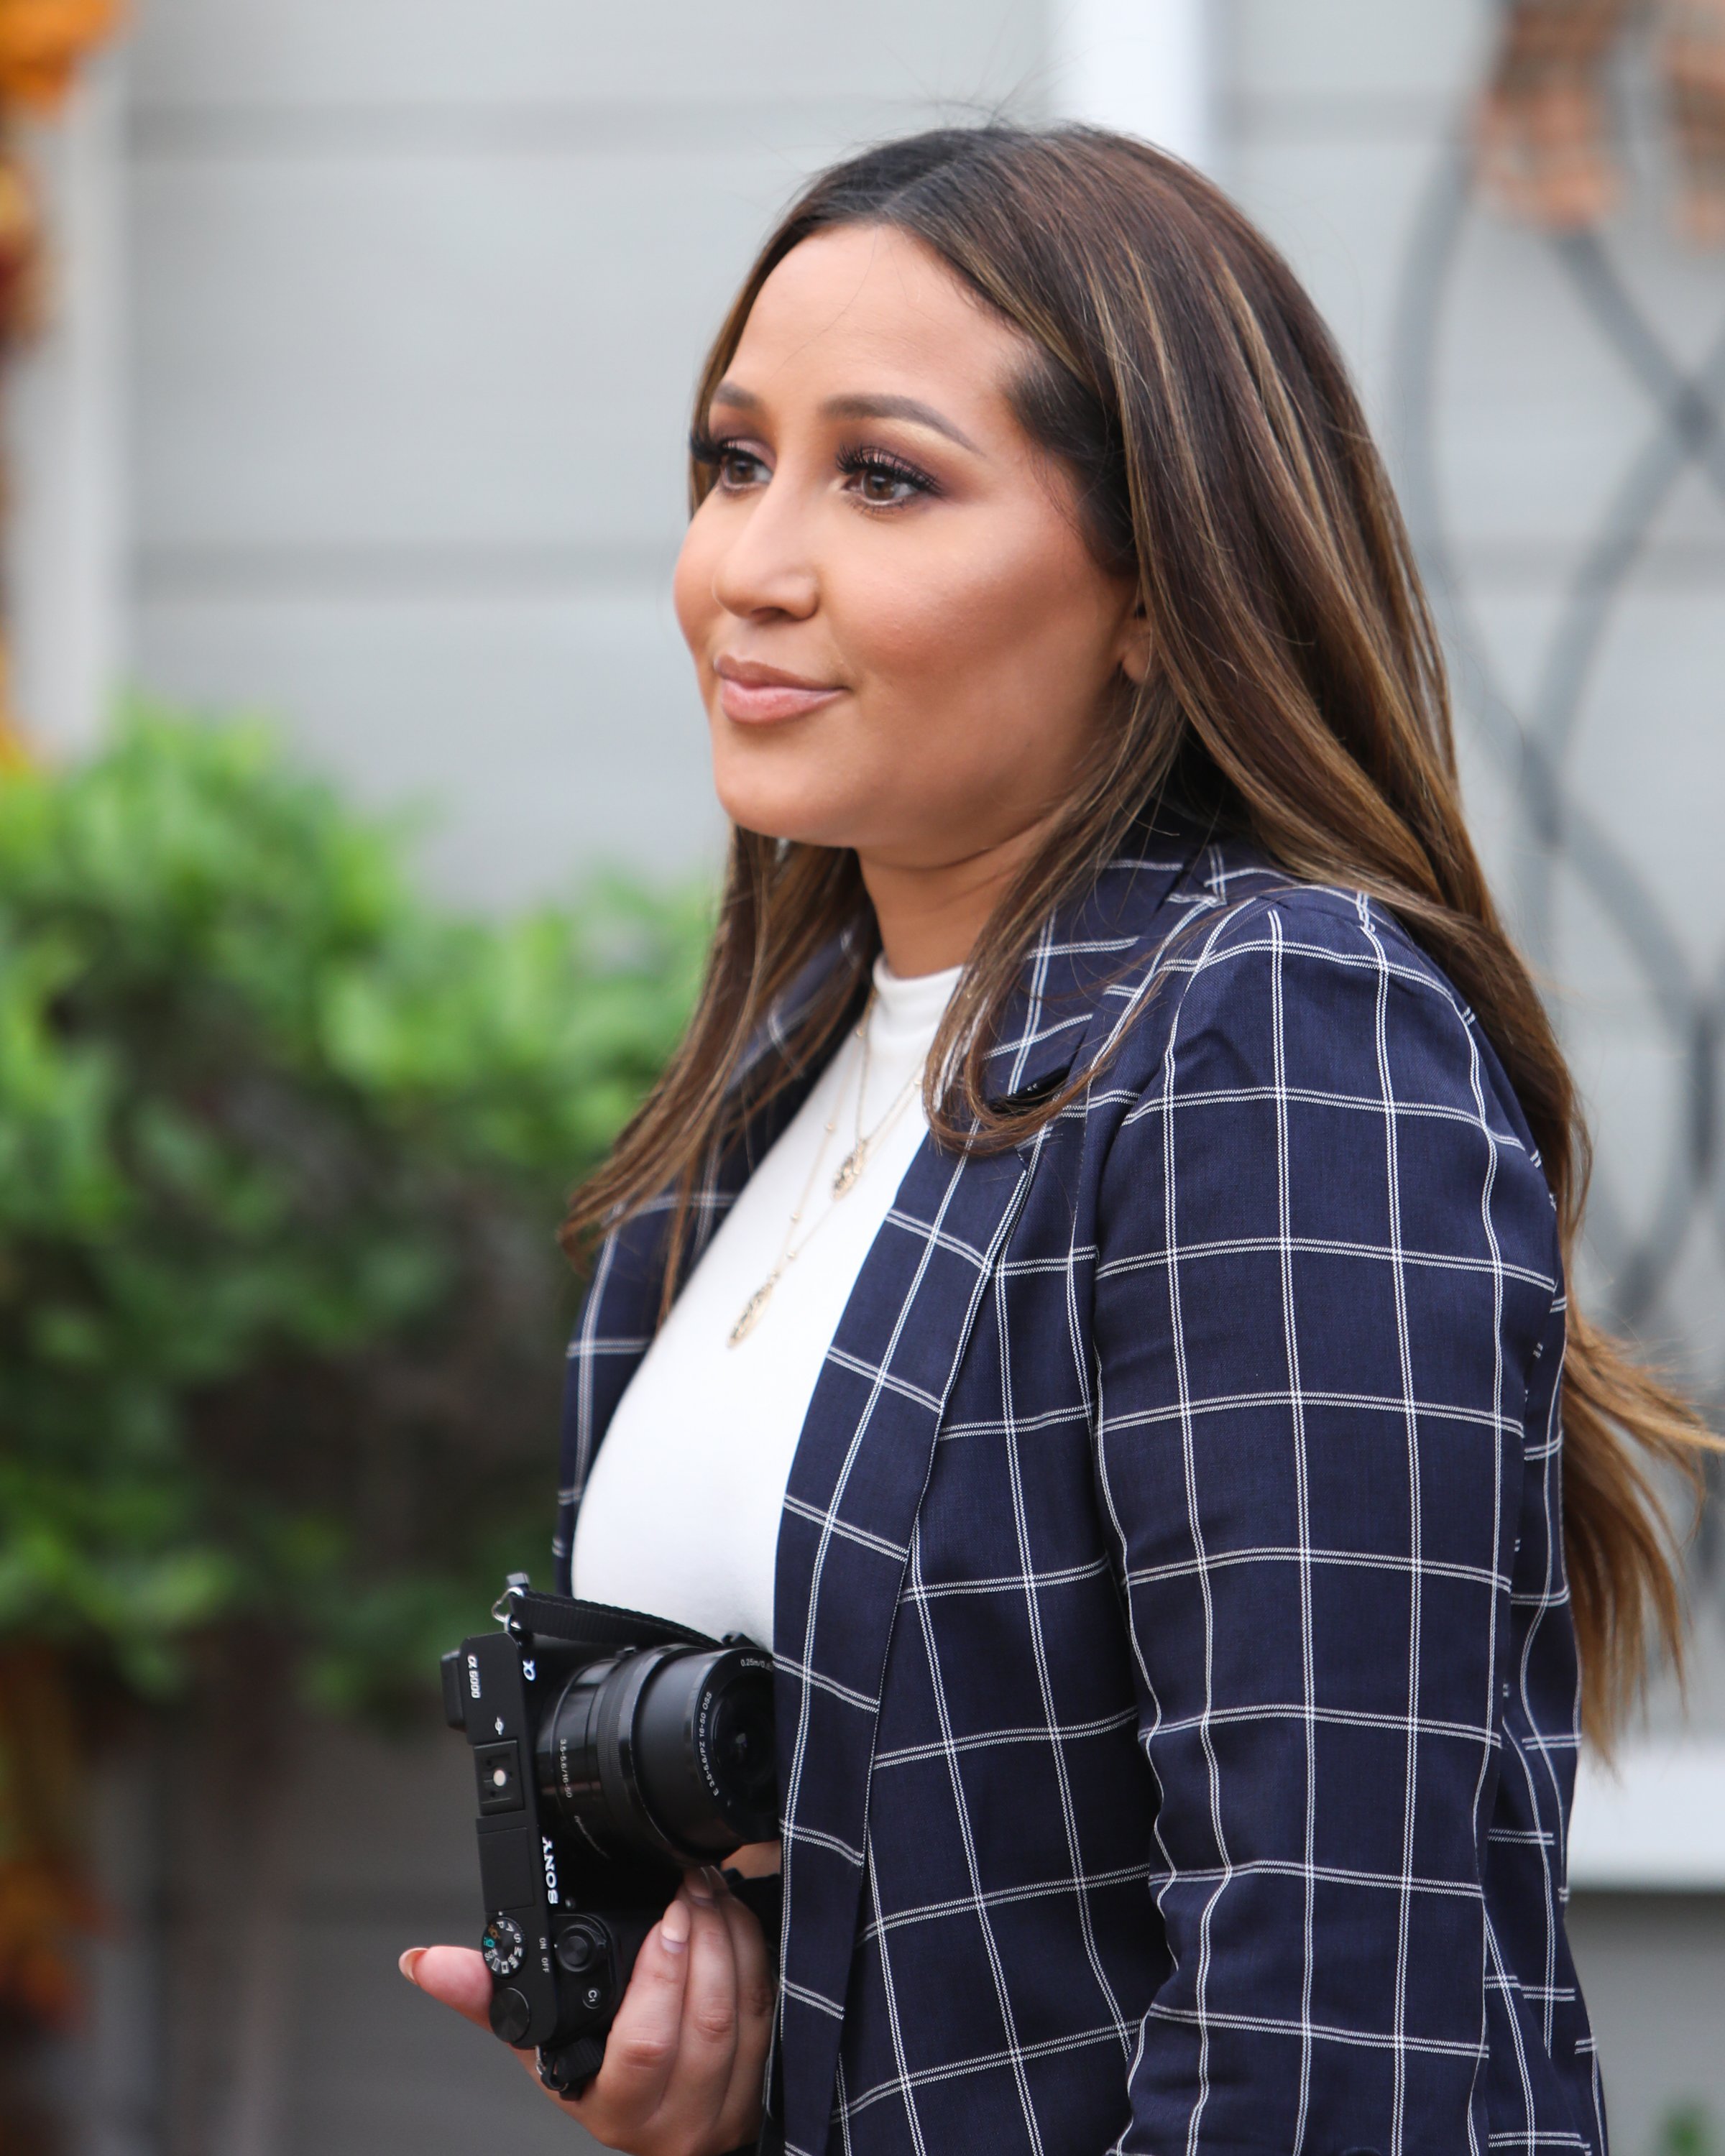  Adrienne Houghton visits Hallmark's "Home & Family" at Universal Studios Hollywood on October 5, 2018 | Photo: GettyImages